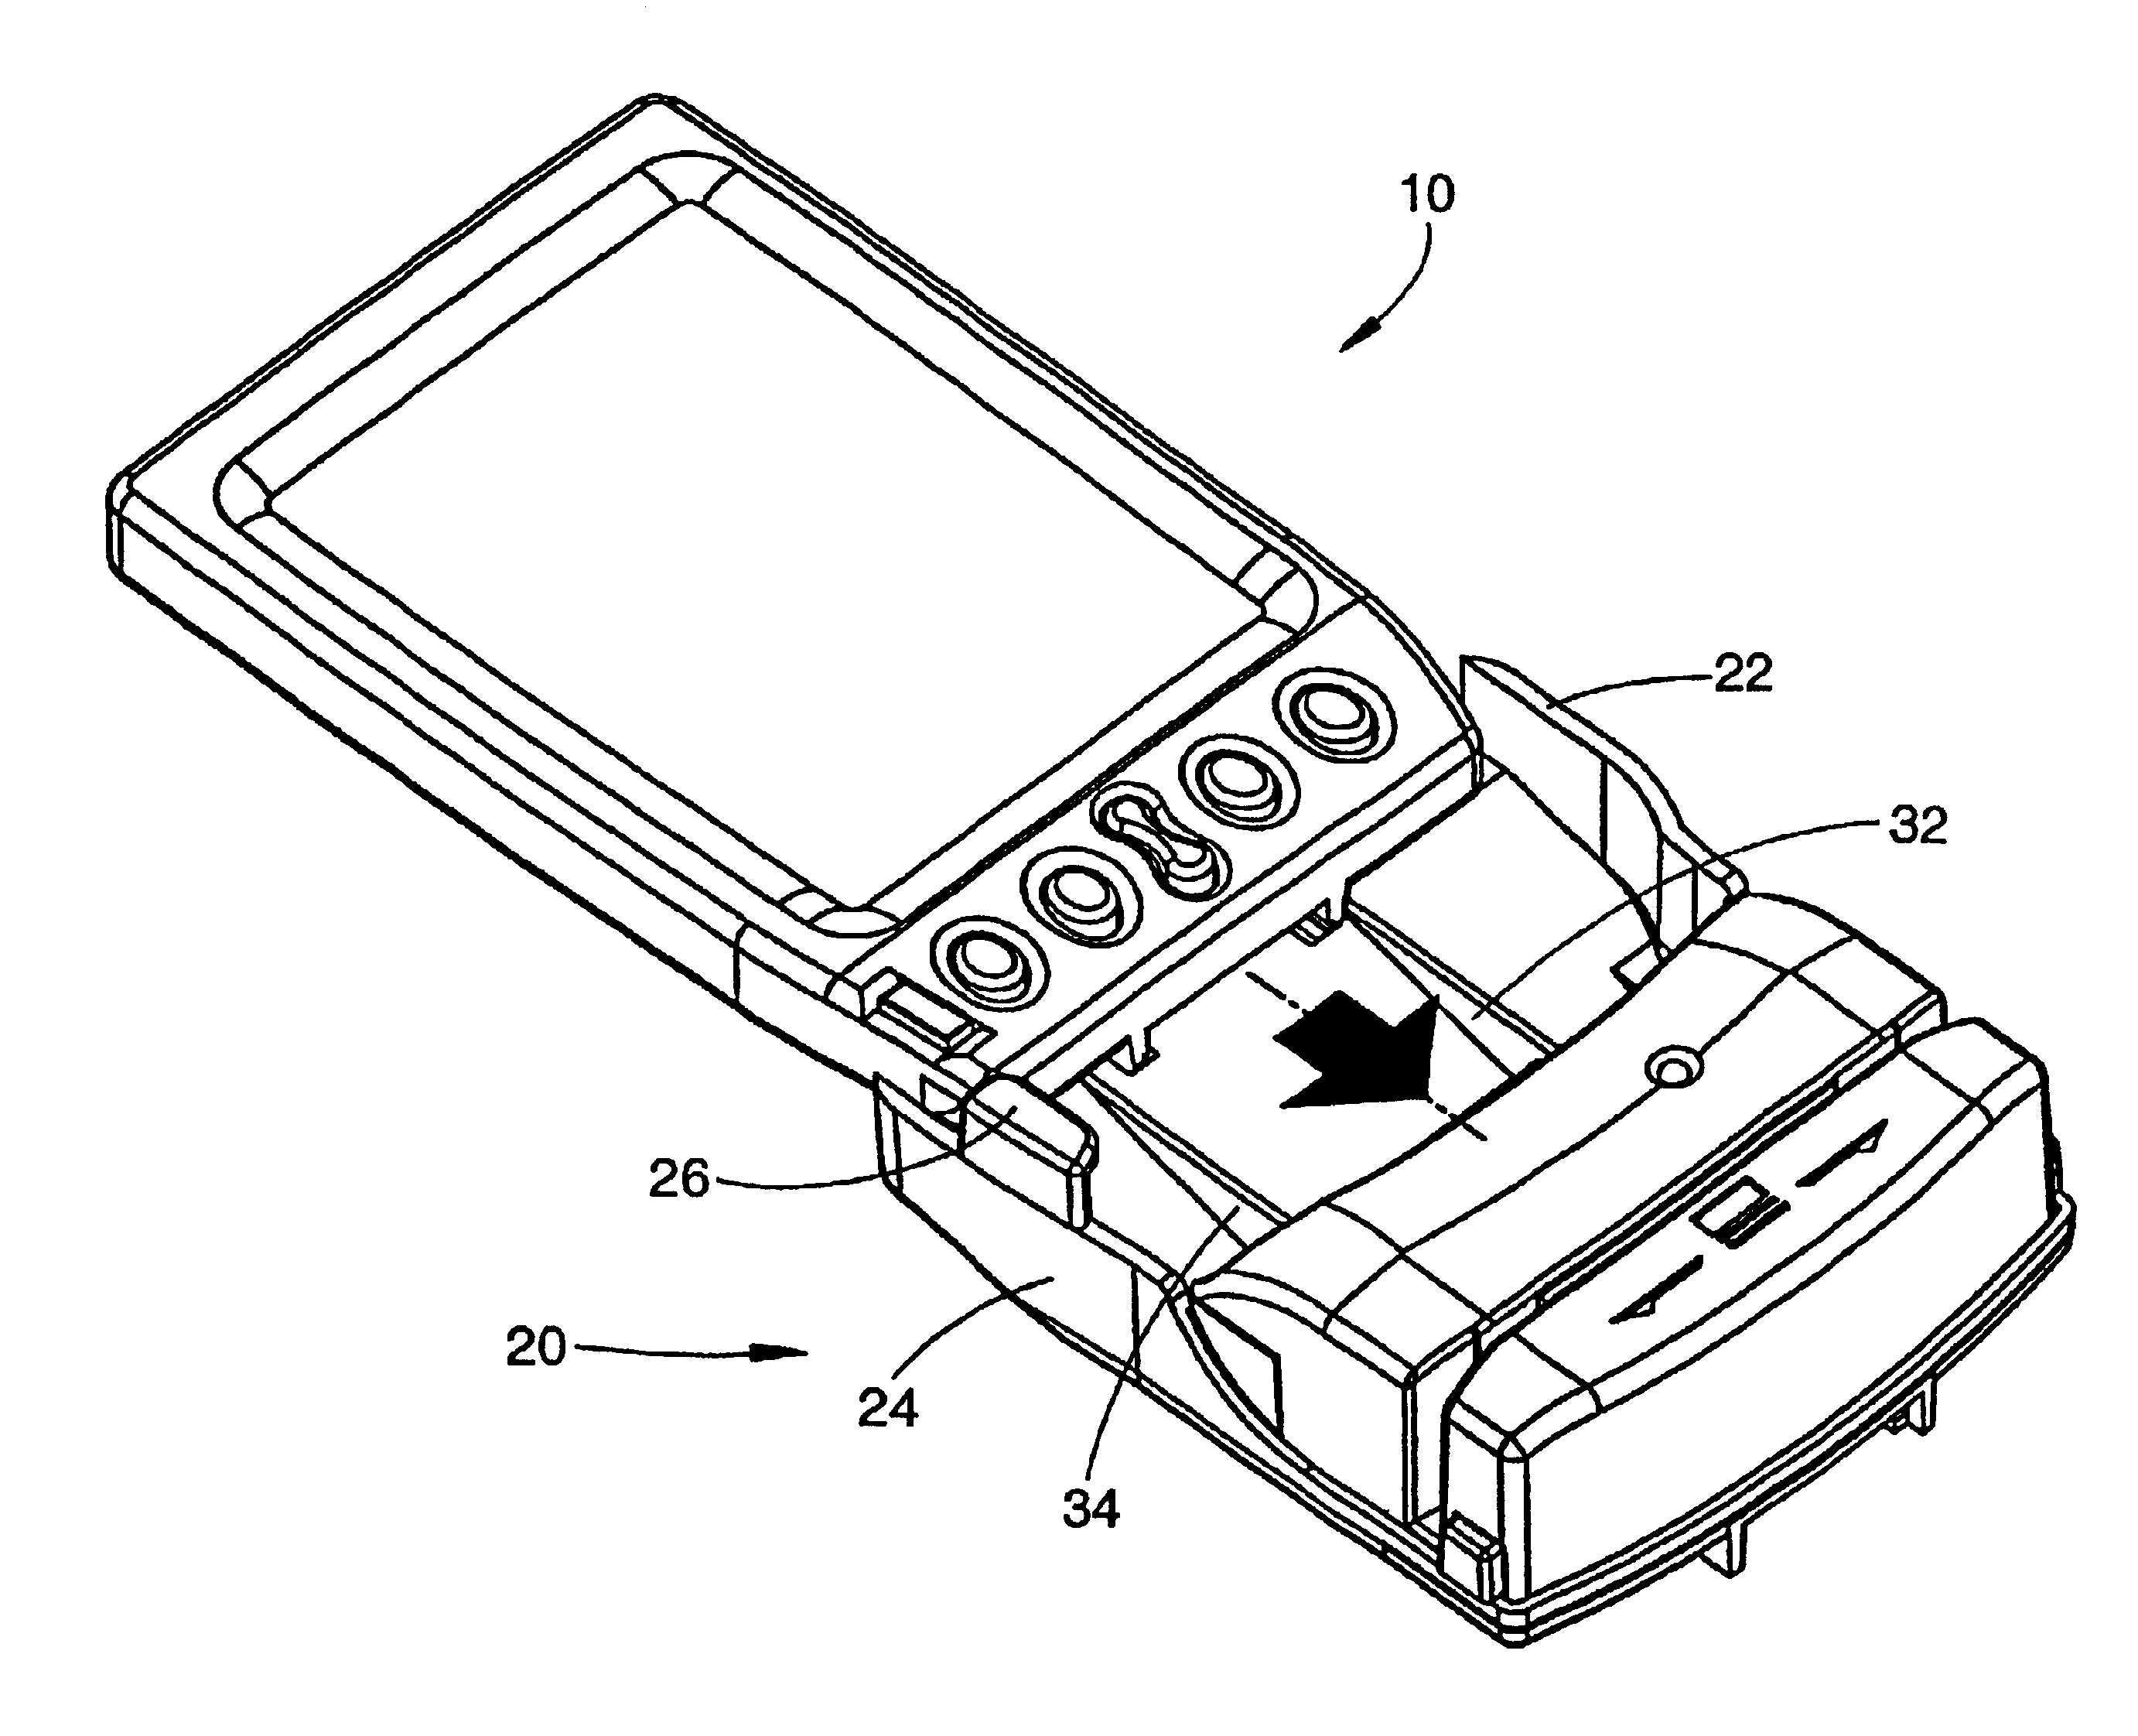 Magnetic strip reader with power management control for attachment to a PDA device